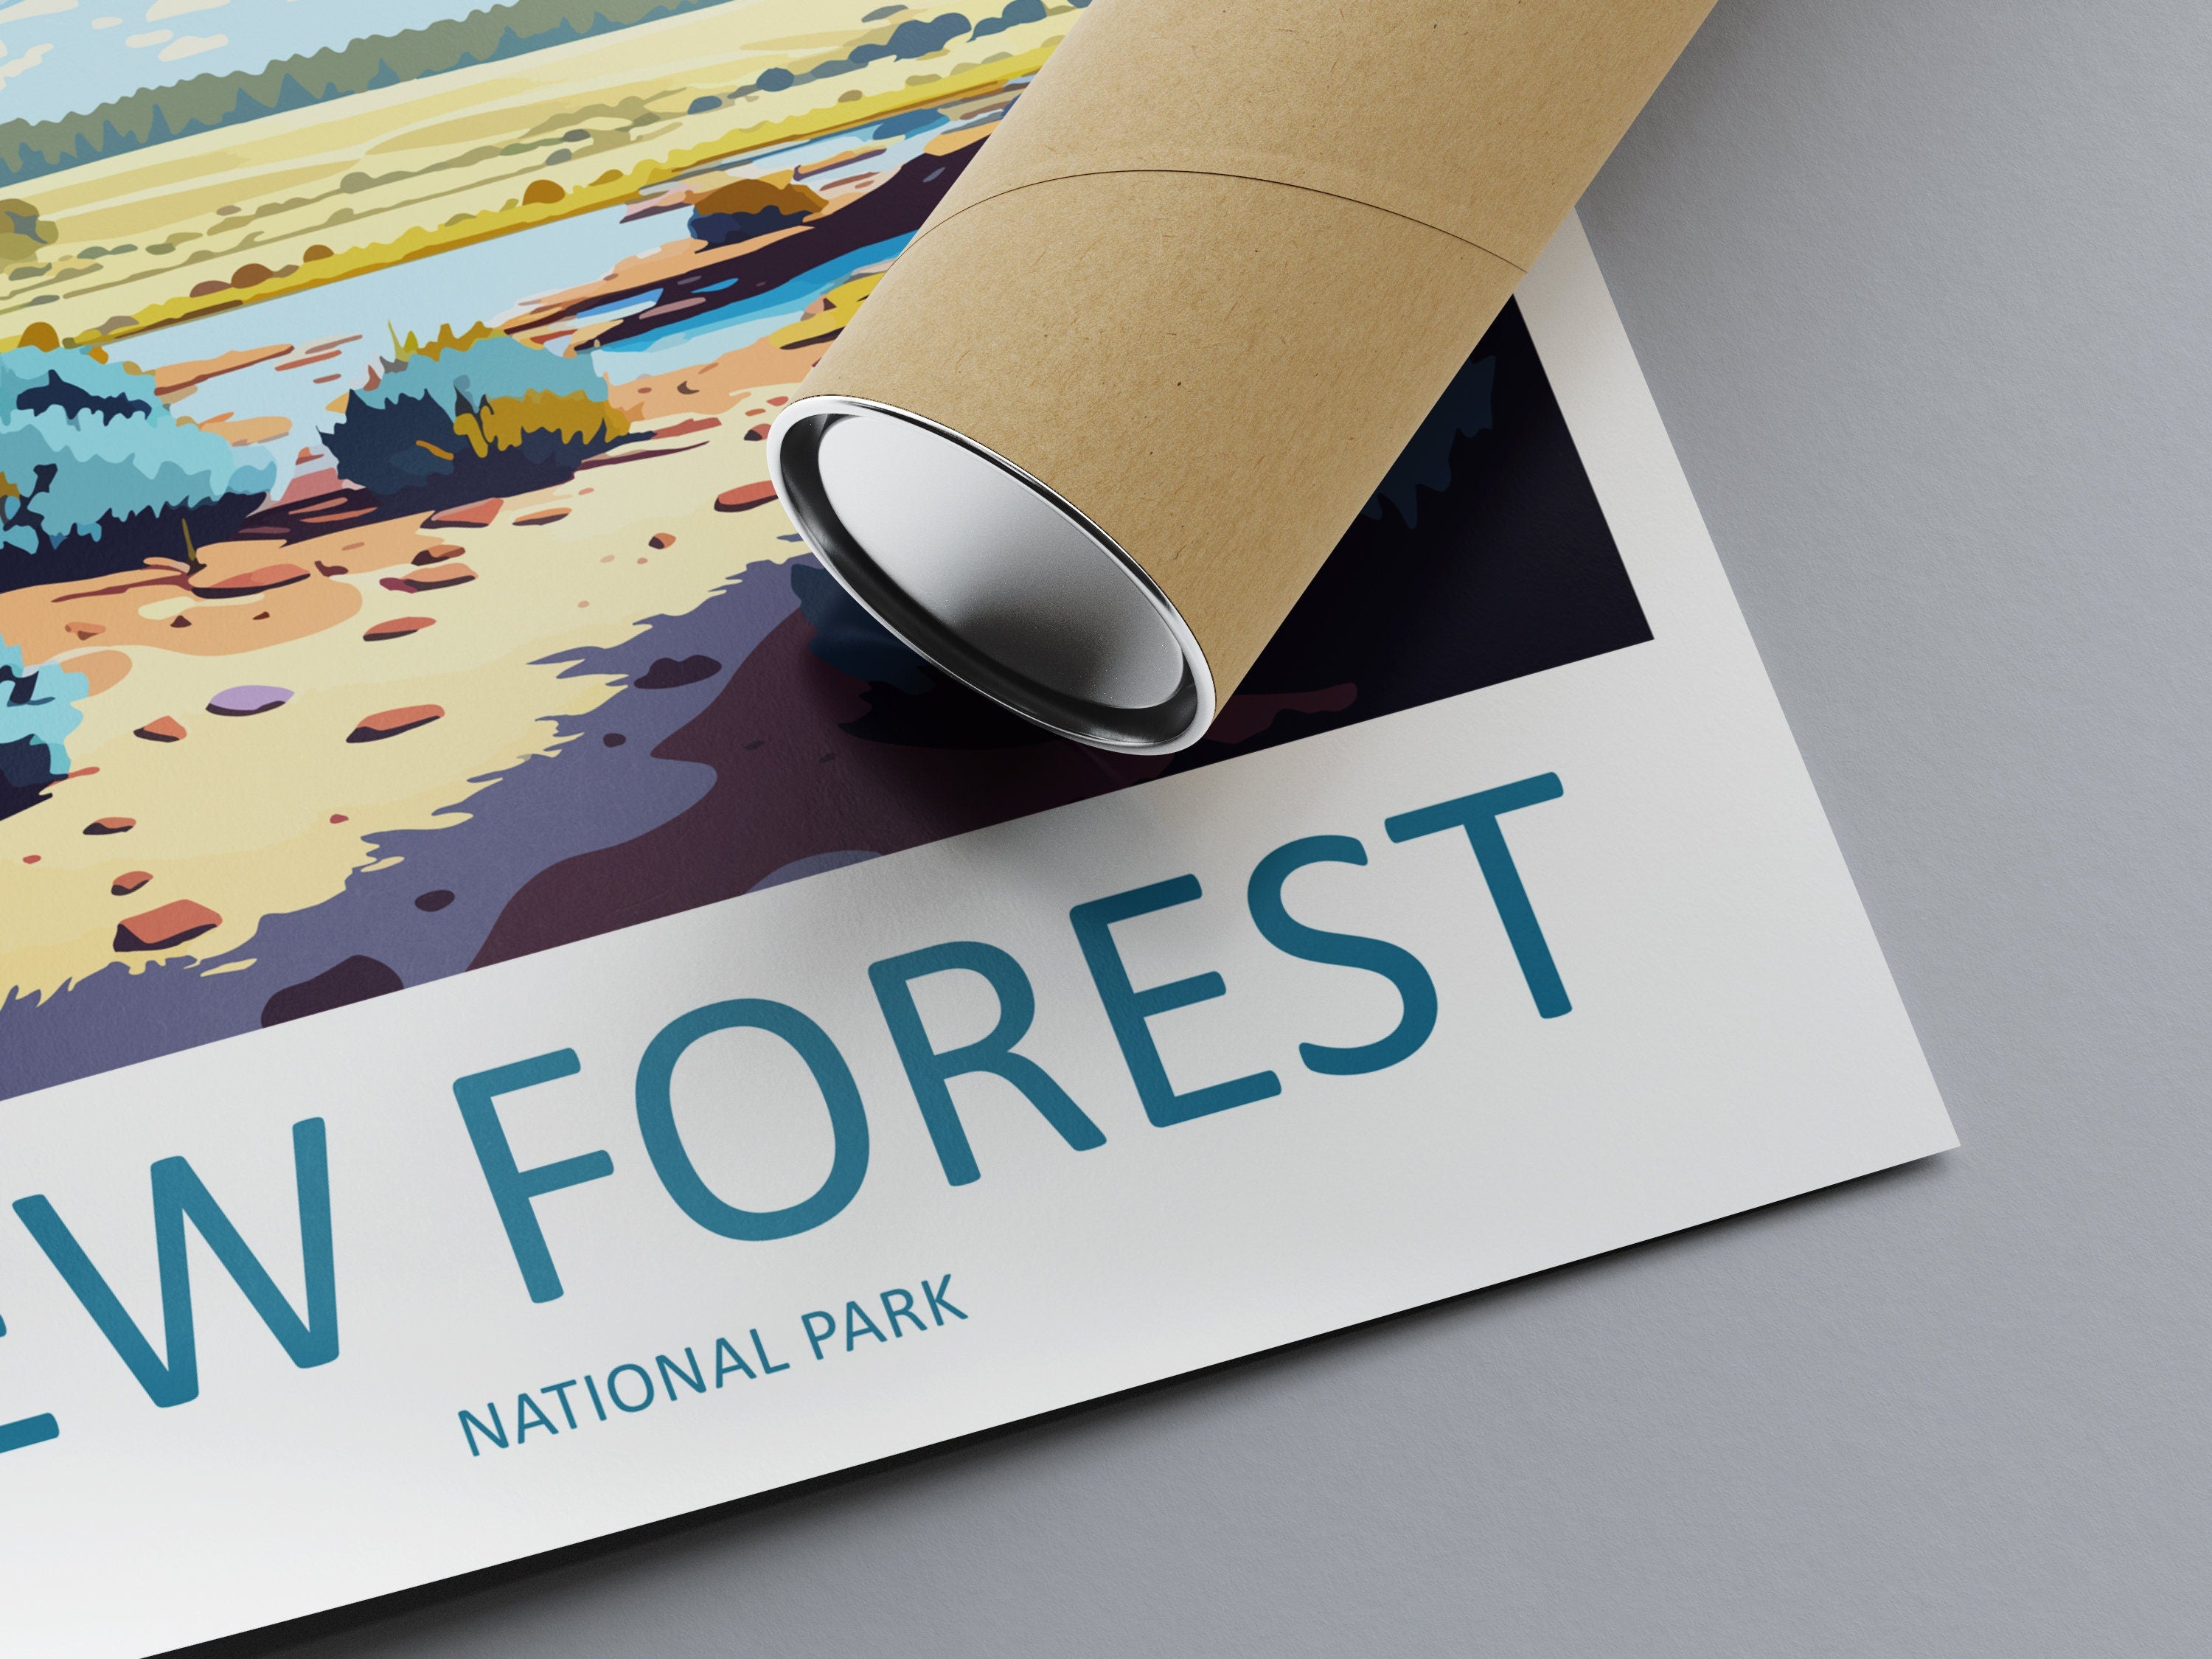 New Forest Travel Print Wall Art New Forest Wall Hanging Home Decor National Park Gift New Forest Lovers Wall Art Print New Forest National